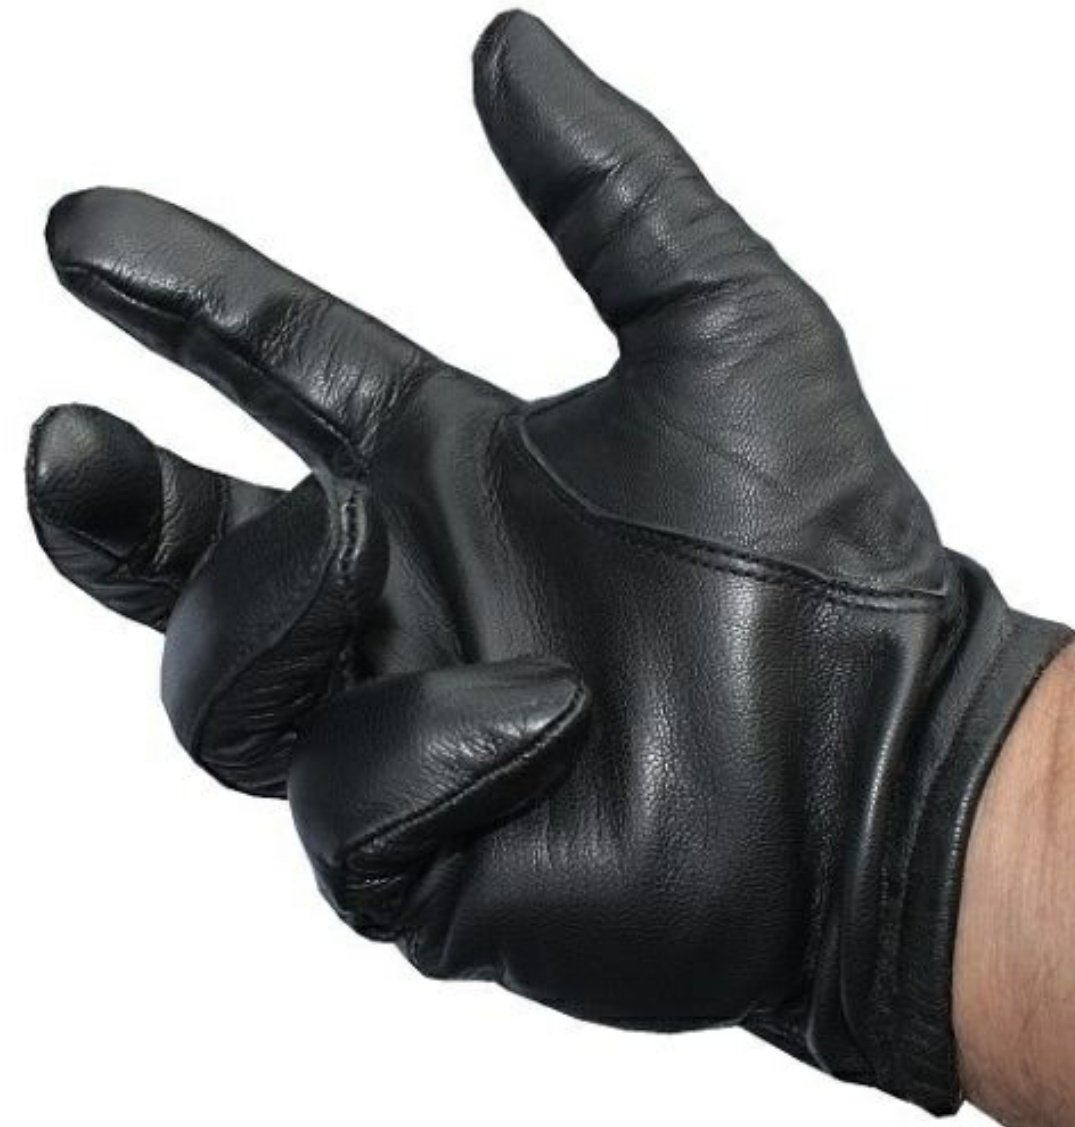 He also has on a pair of thin, black leather gloves that stop right at his wrist. They make his hands look like a dangerous weapon, and Kirishima shudders as he imagines those hands on him tonight, touching him in ways that he can only dream of.